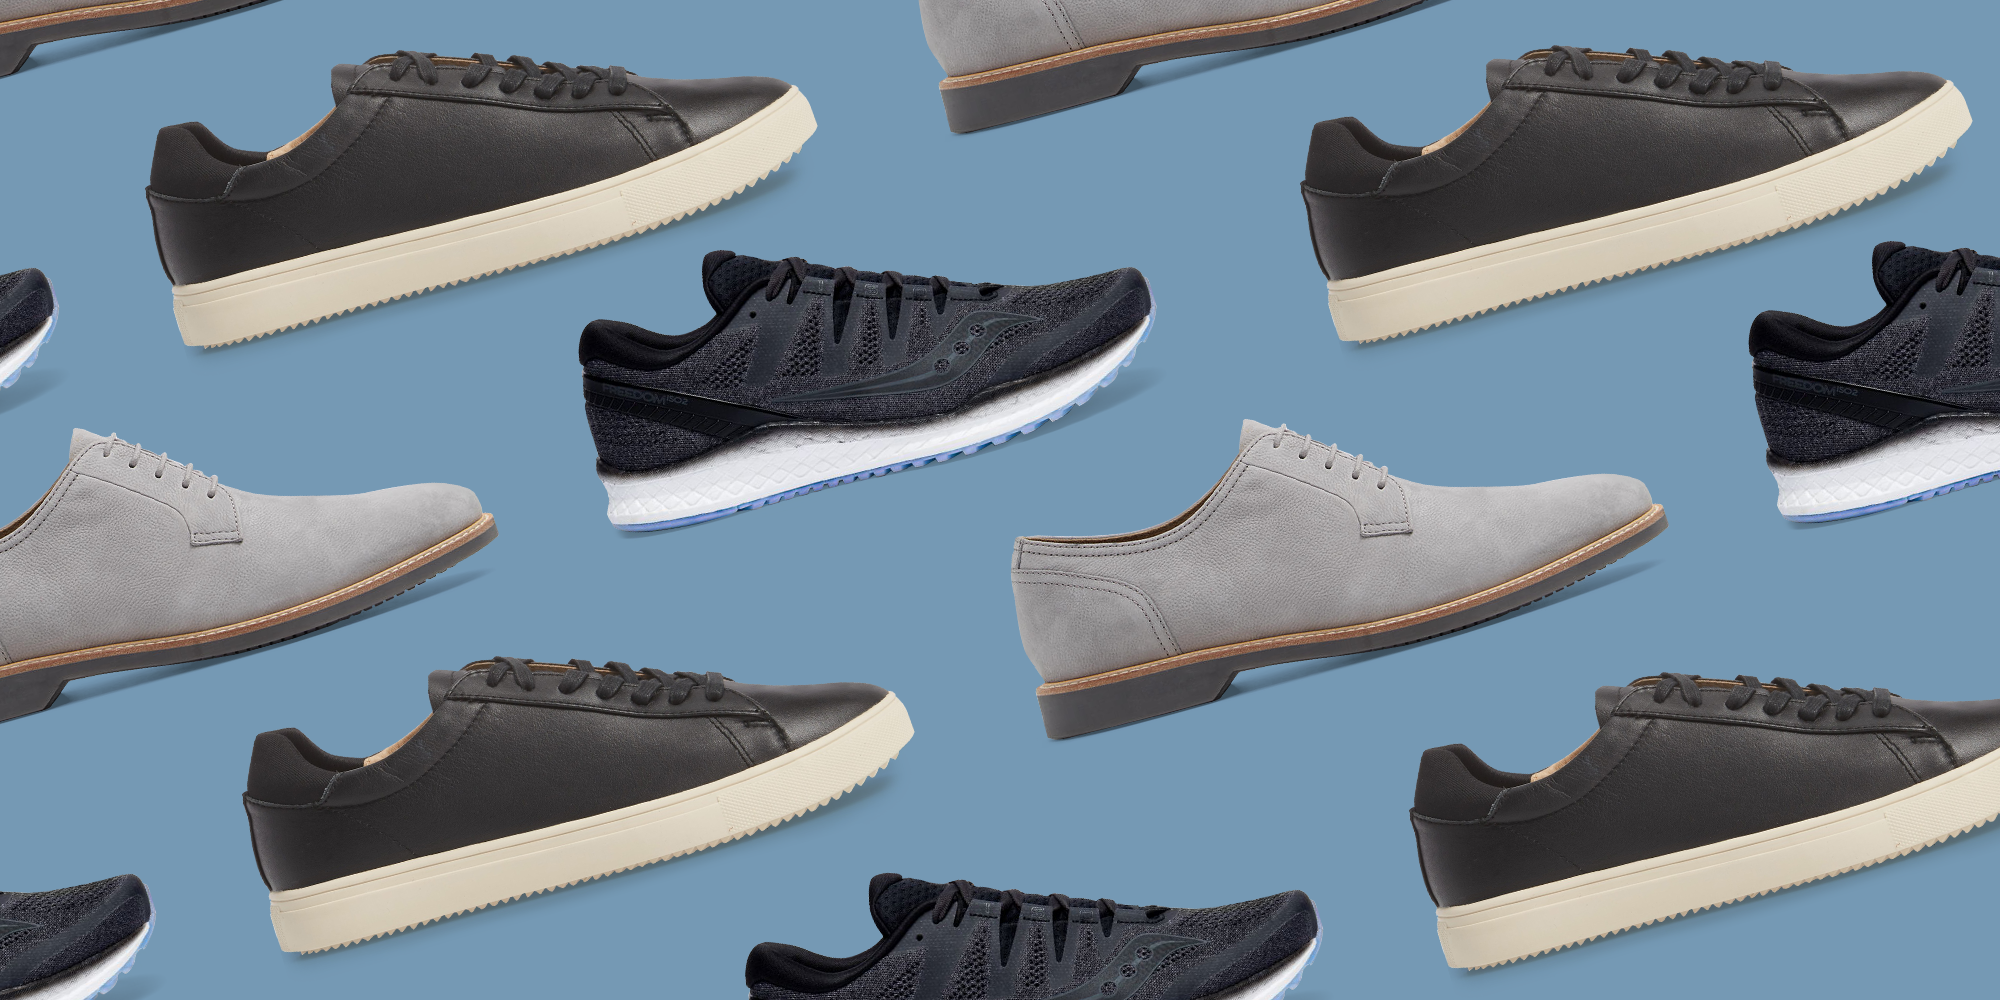 Business casual shoes for men: 5 styles every man should own - The Manual